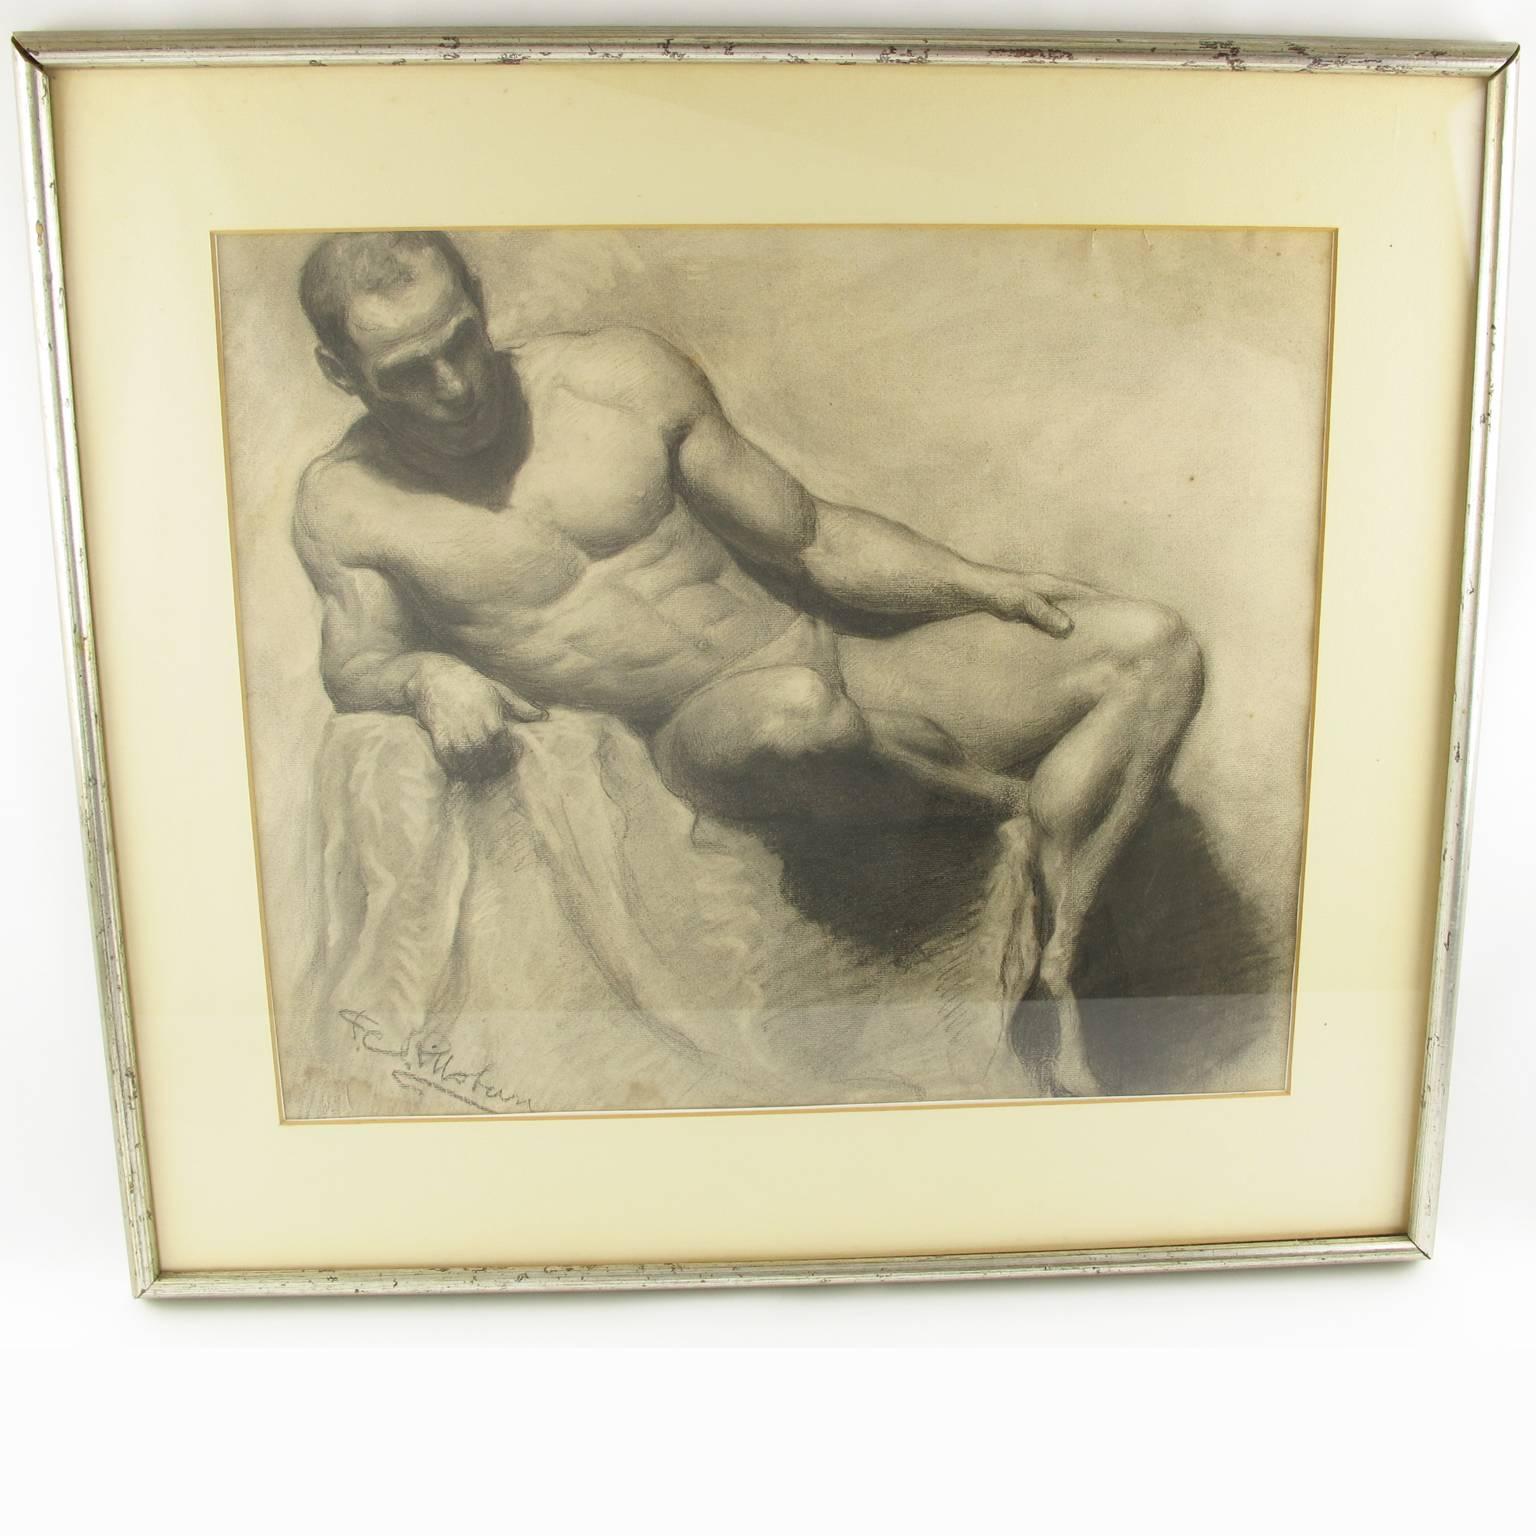 Signed man nude study, graphite, charcoal on arches paper painting. Signature on bottom left corner that read: F.C.?. Original silver leaf frame with glass protection.

Measurements:
With frame: 28.50 in. wide (72.5 cm) x 25.75 in. high (65.5